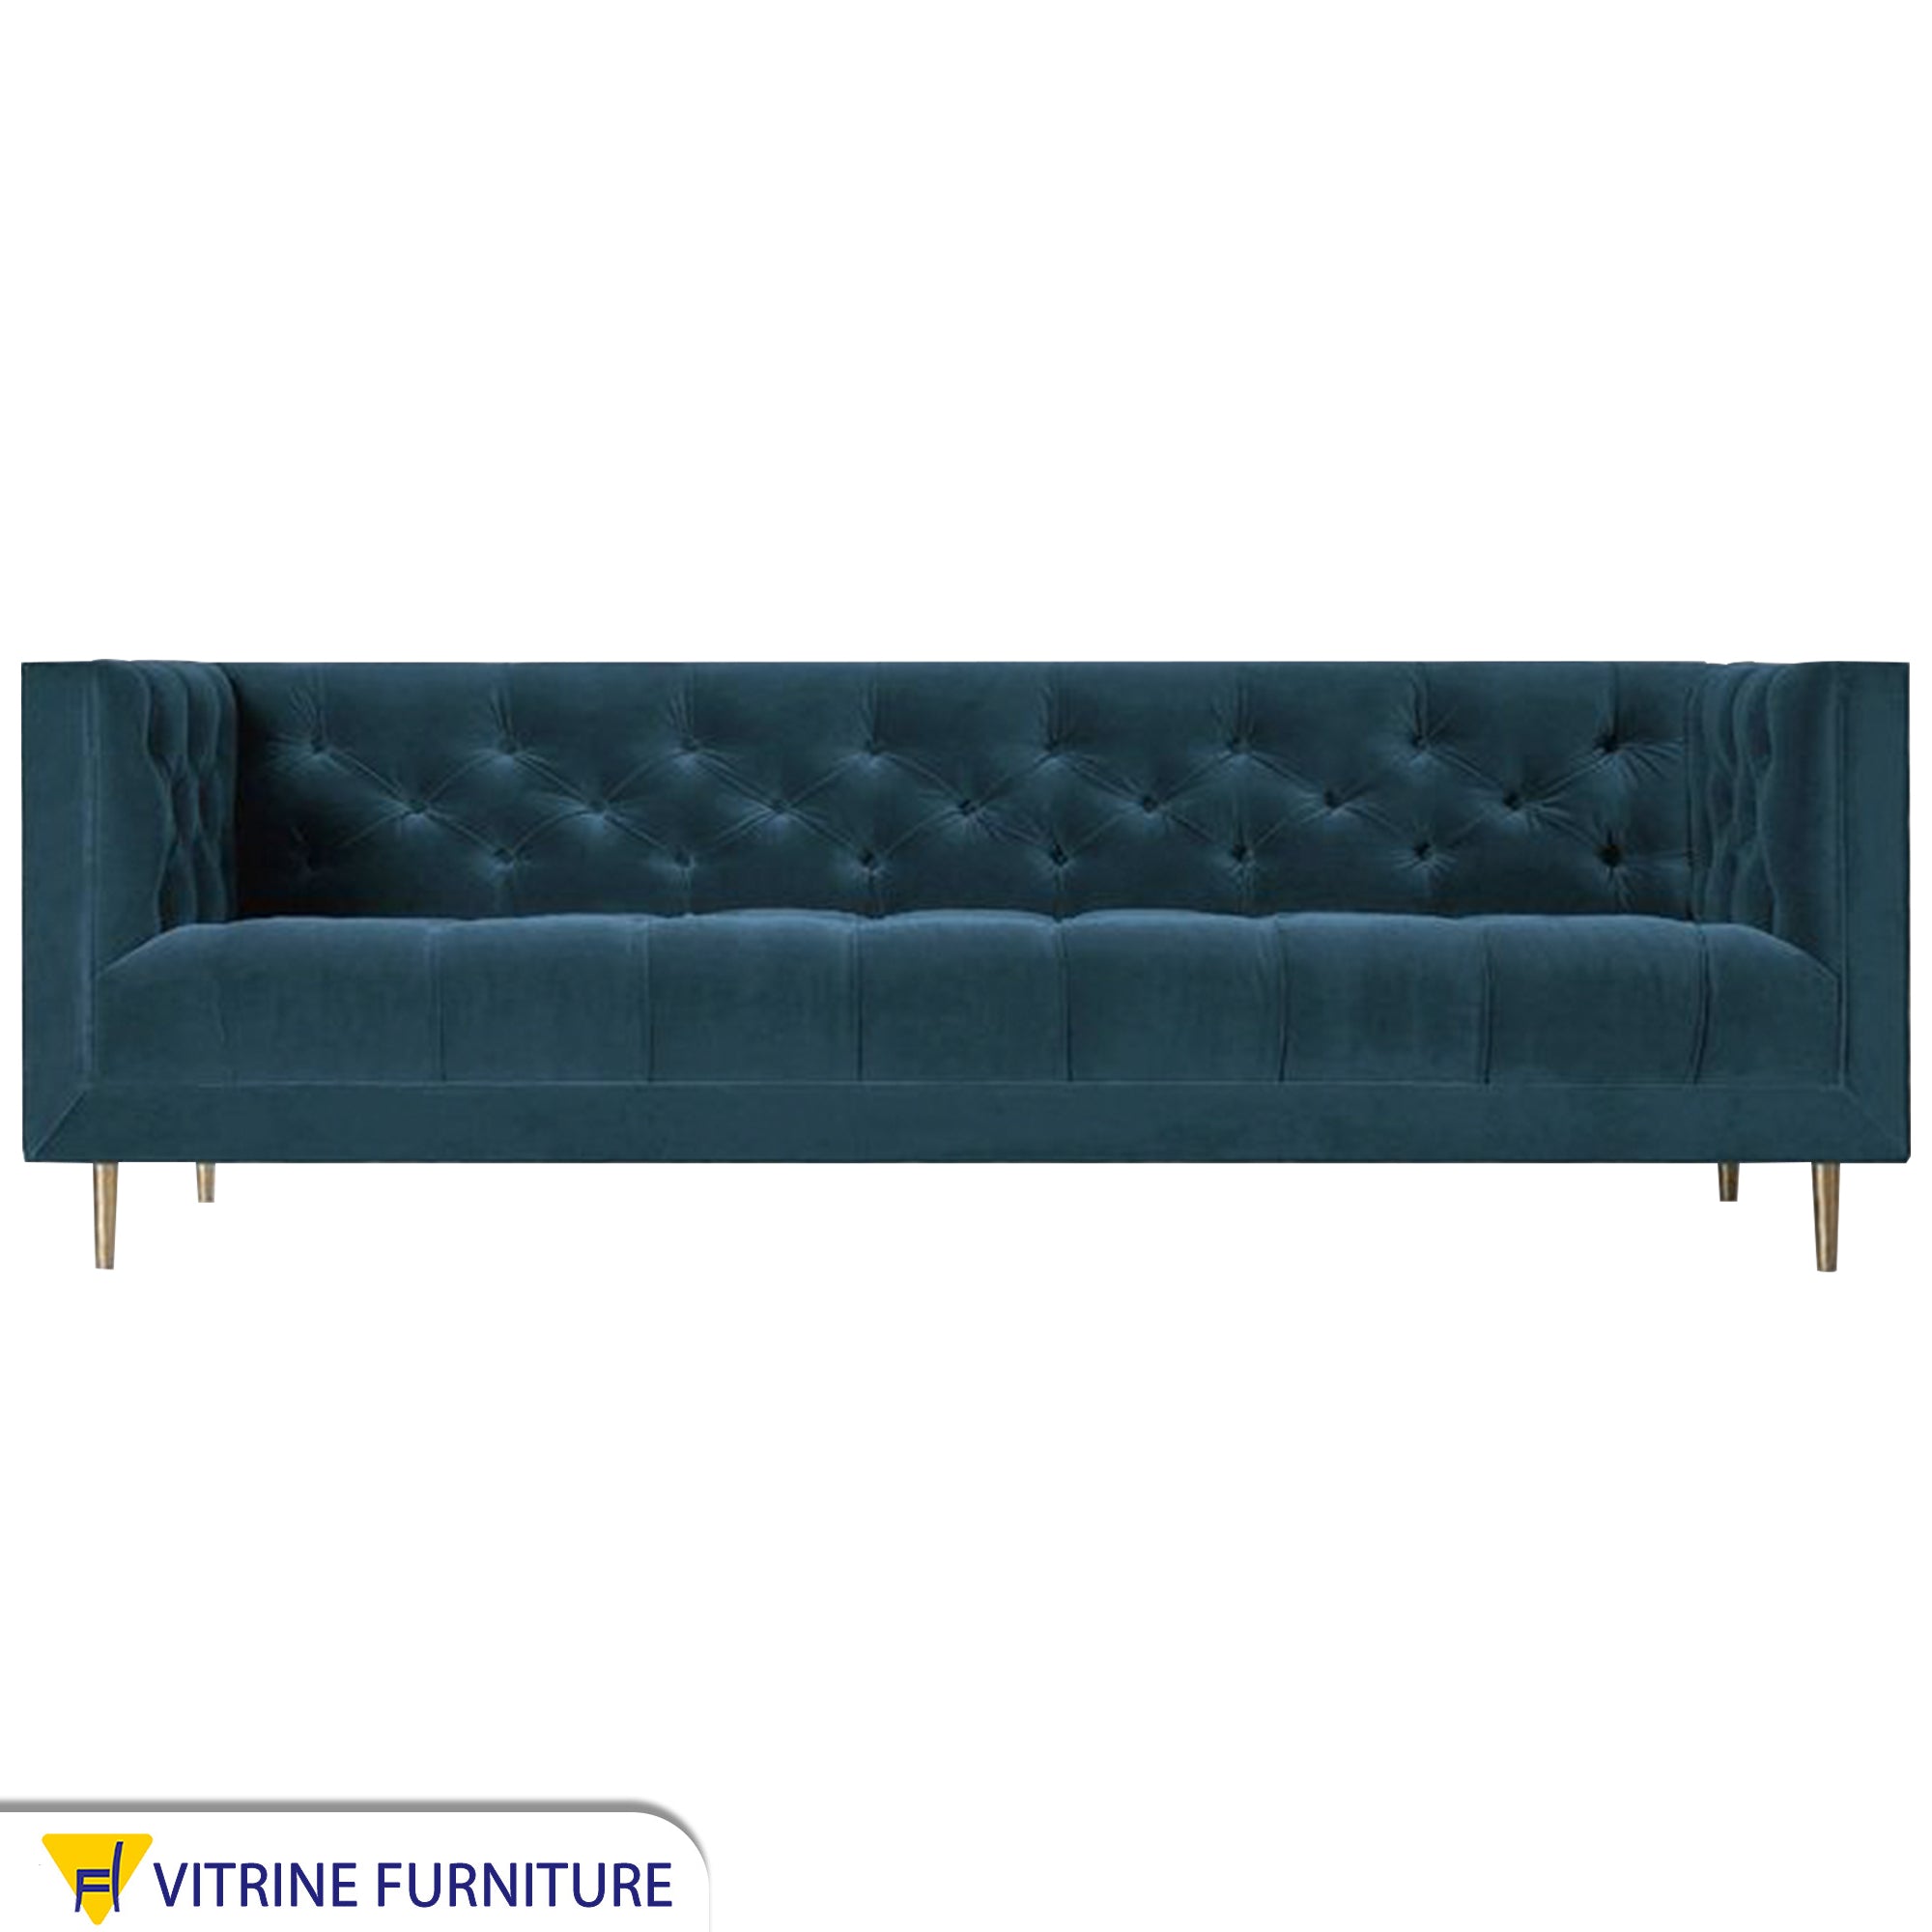 Genzari sofa with capotonian grain on the back and the handle